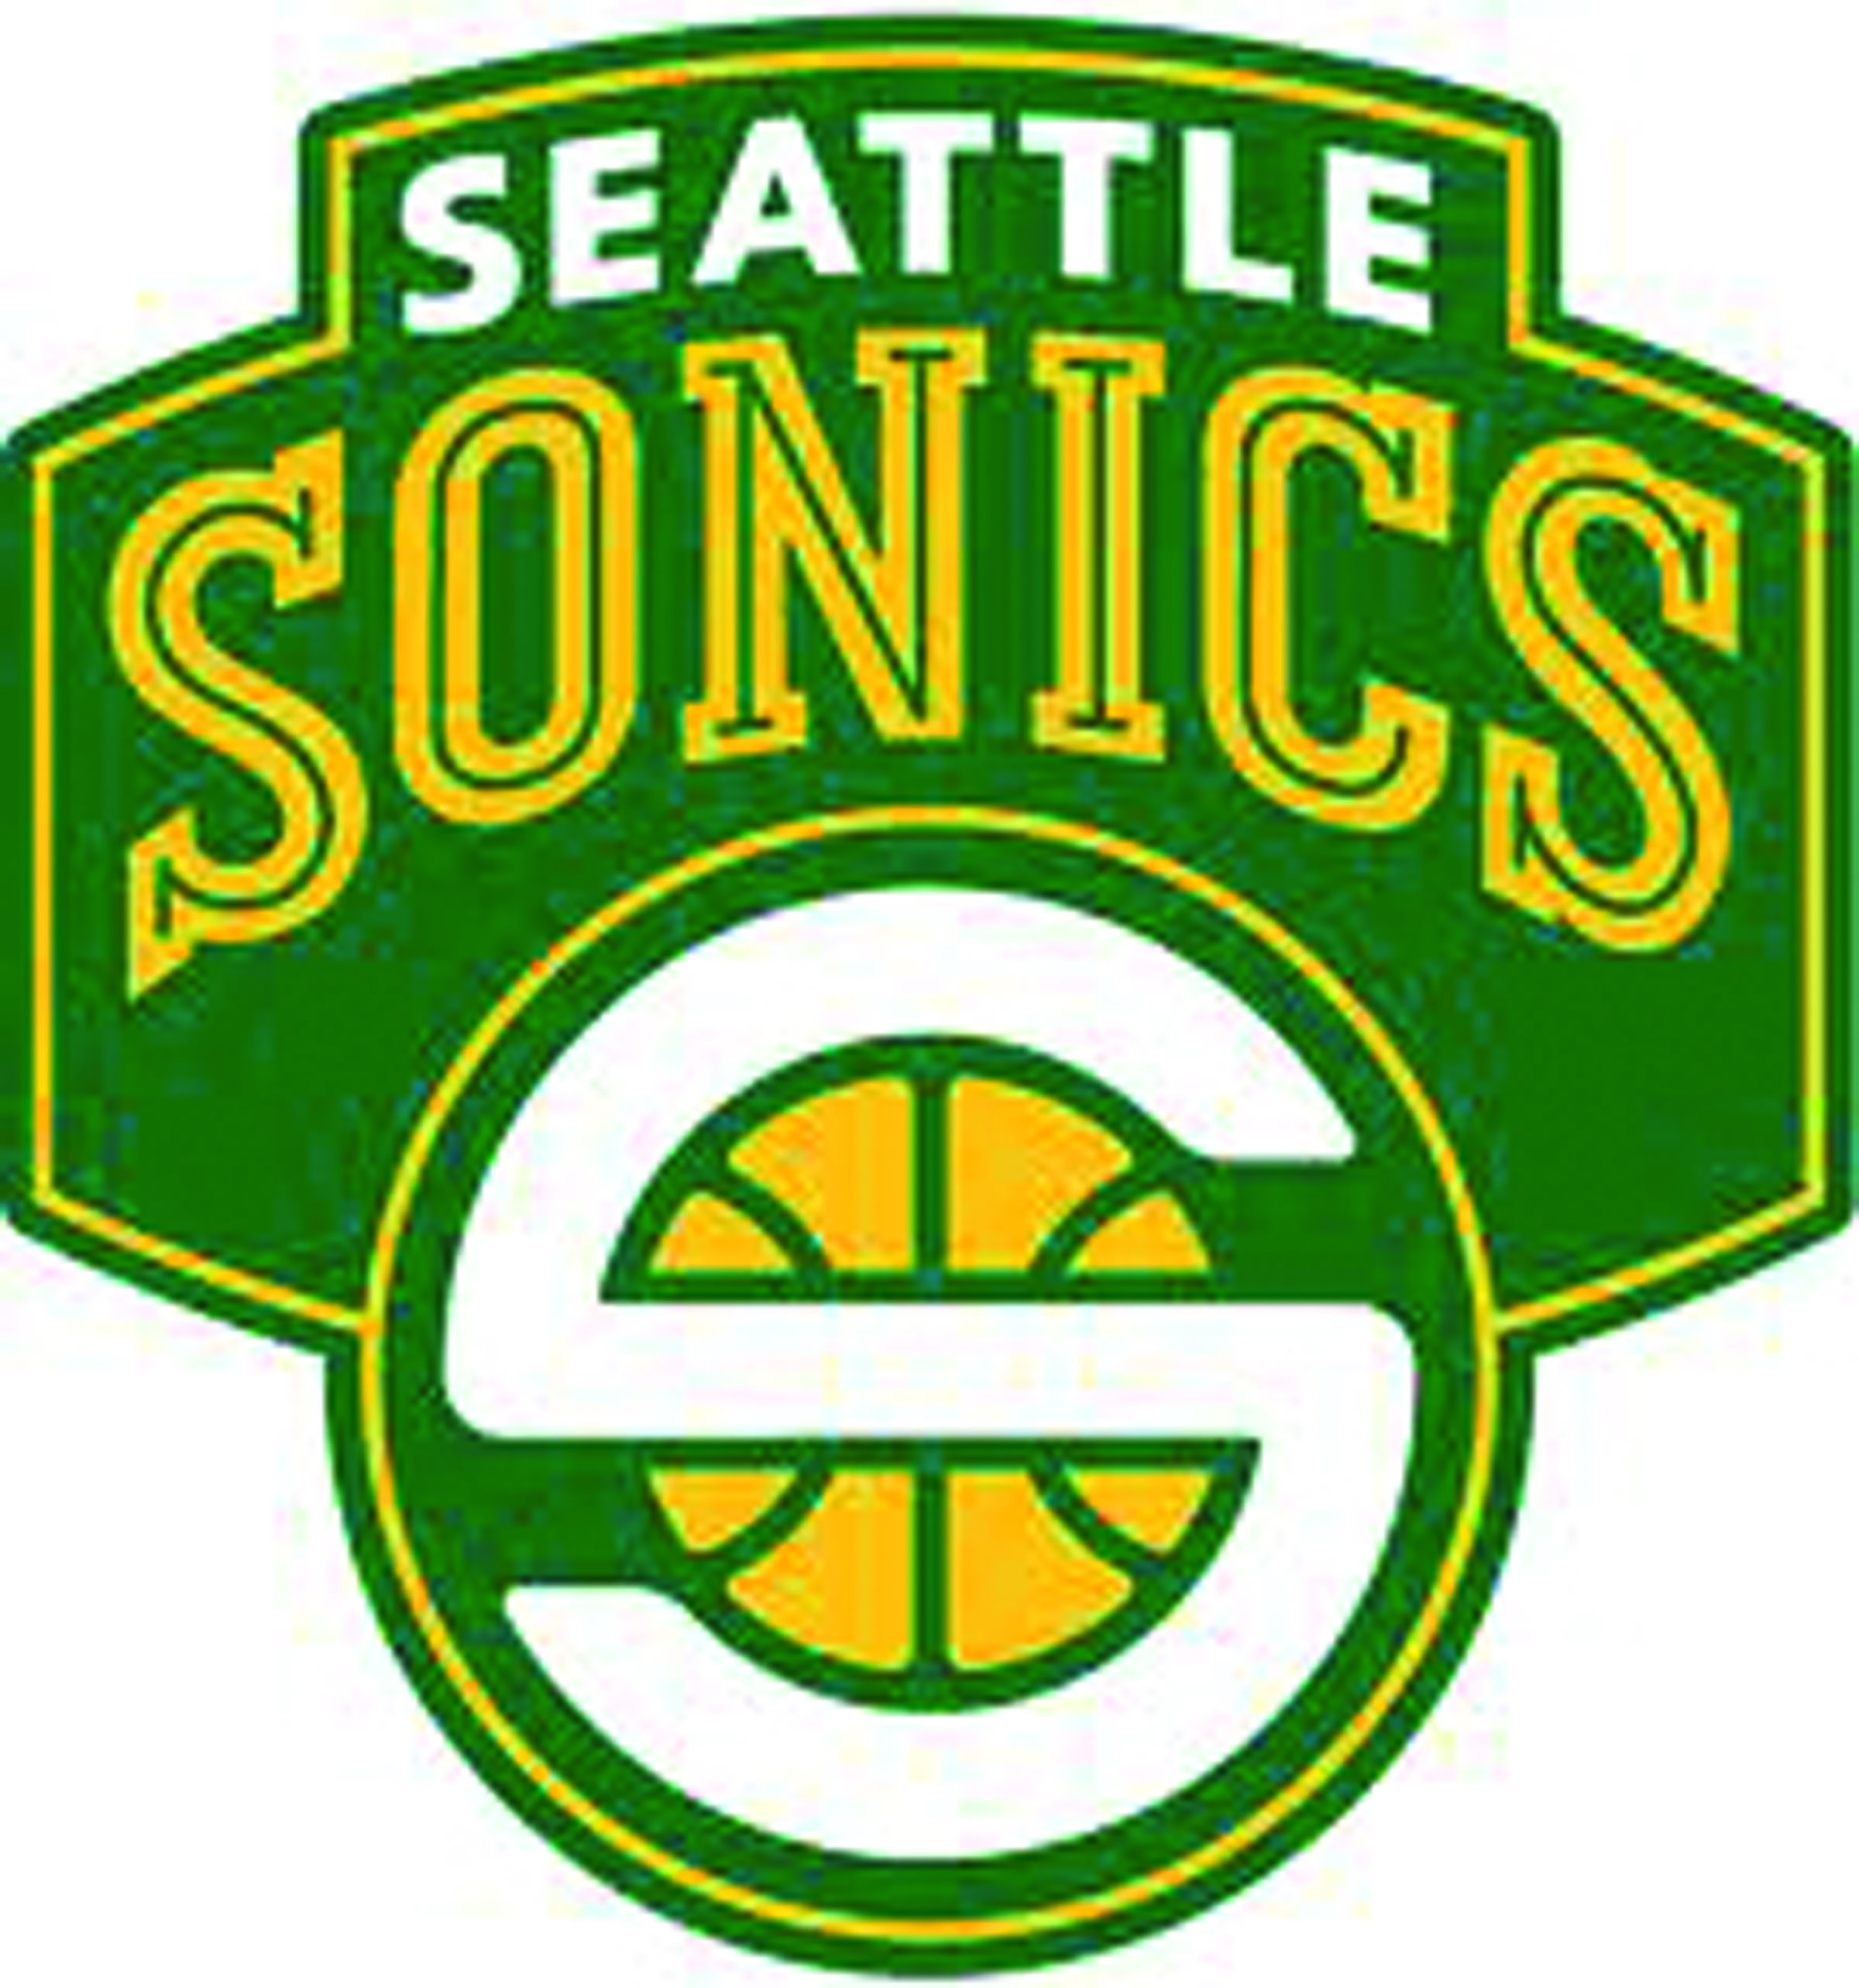 BREAKING: SuperSonics in our future? Maloofs agree to sell NBA's Kings to Seattle group